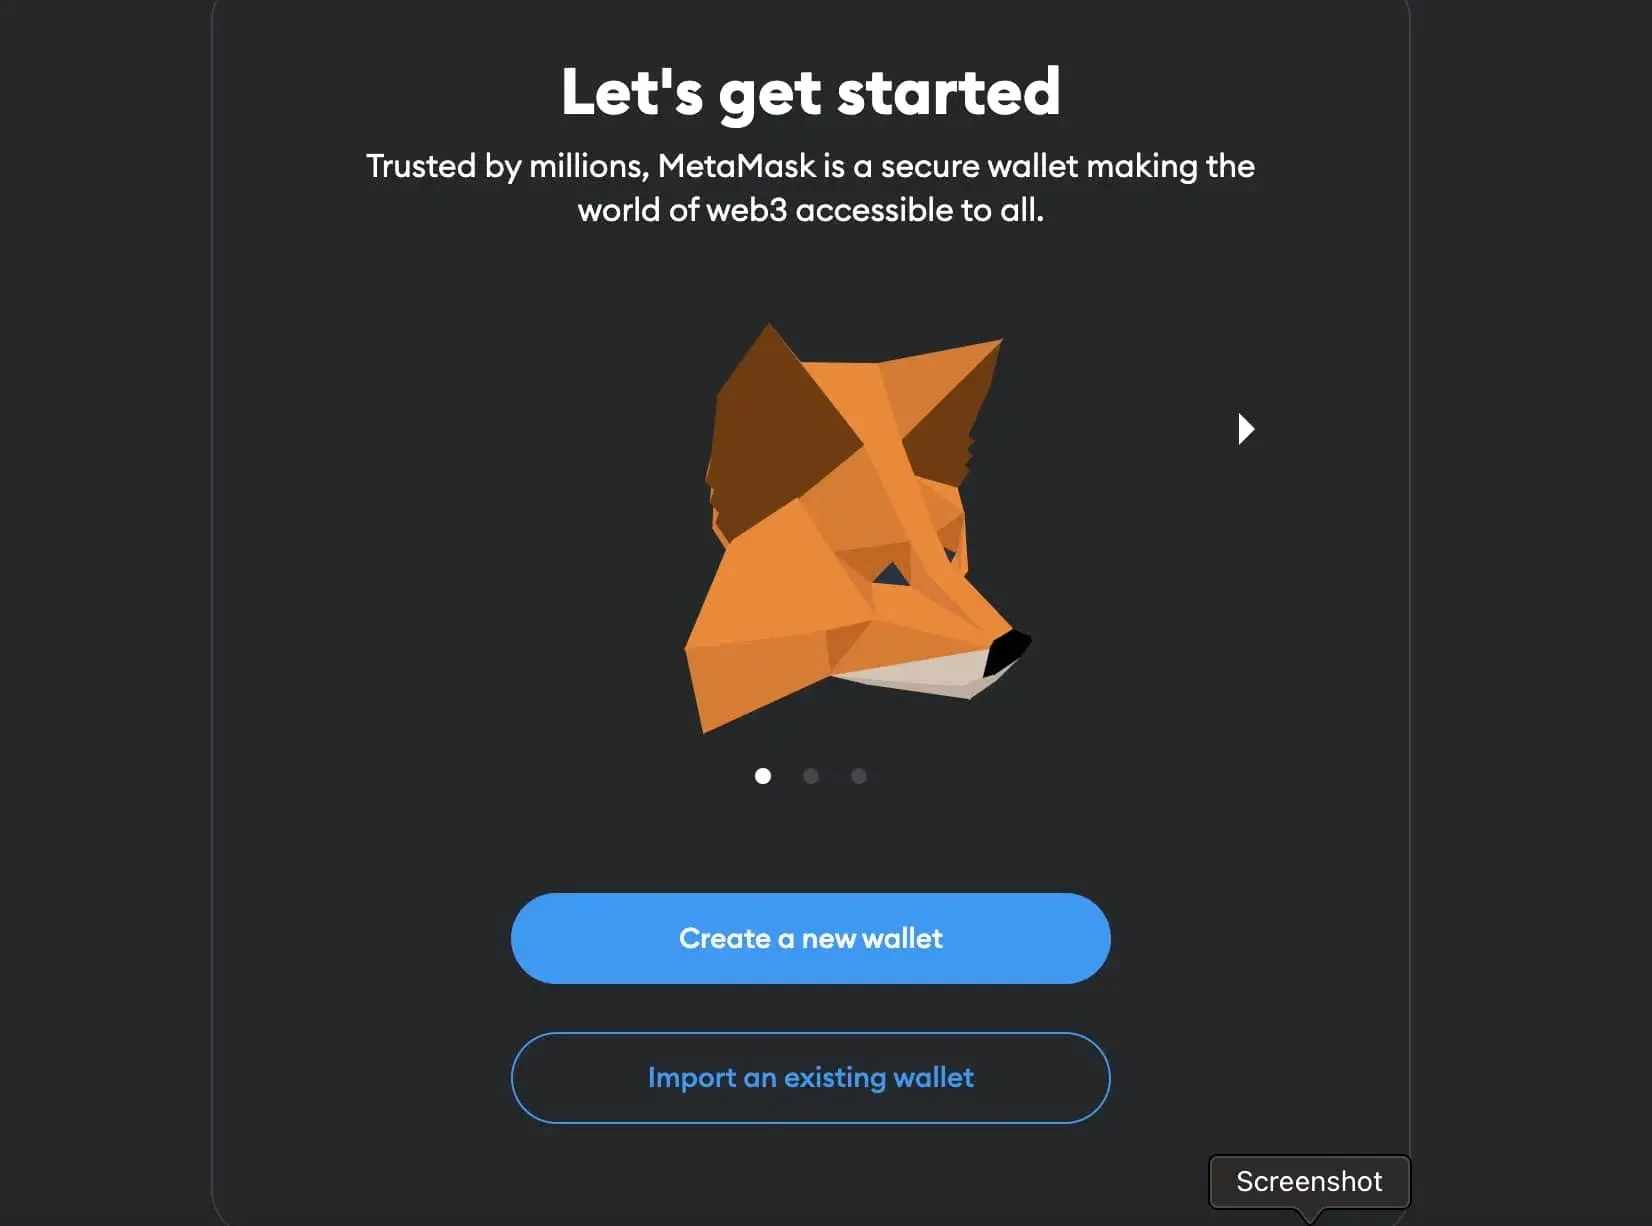 How to Revoke Access on Metamask: Step-by-Step Guide